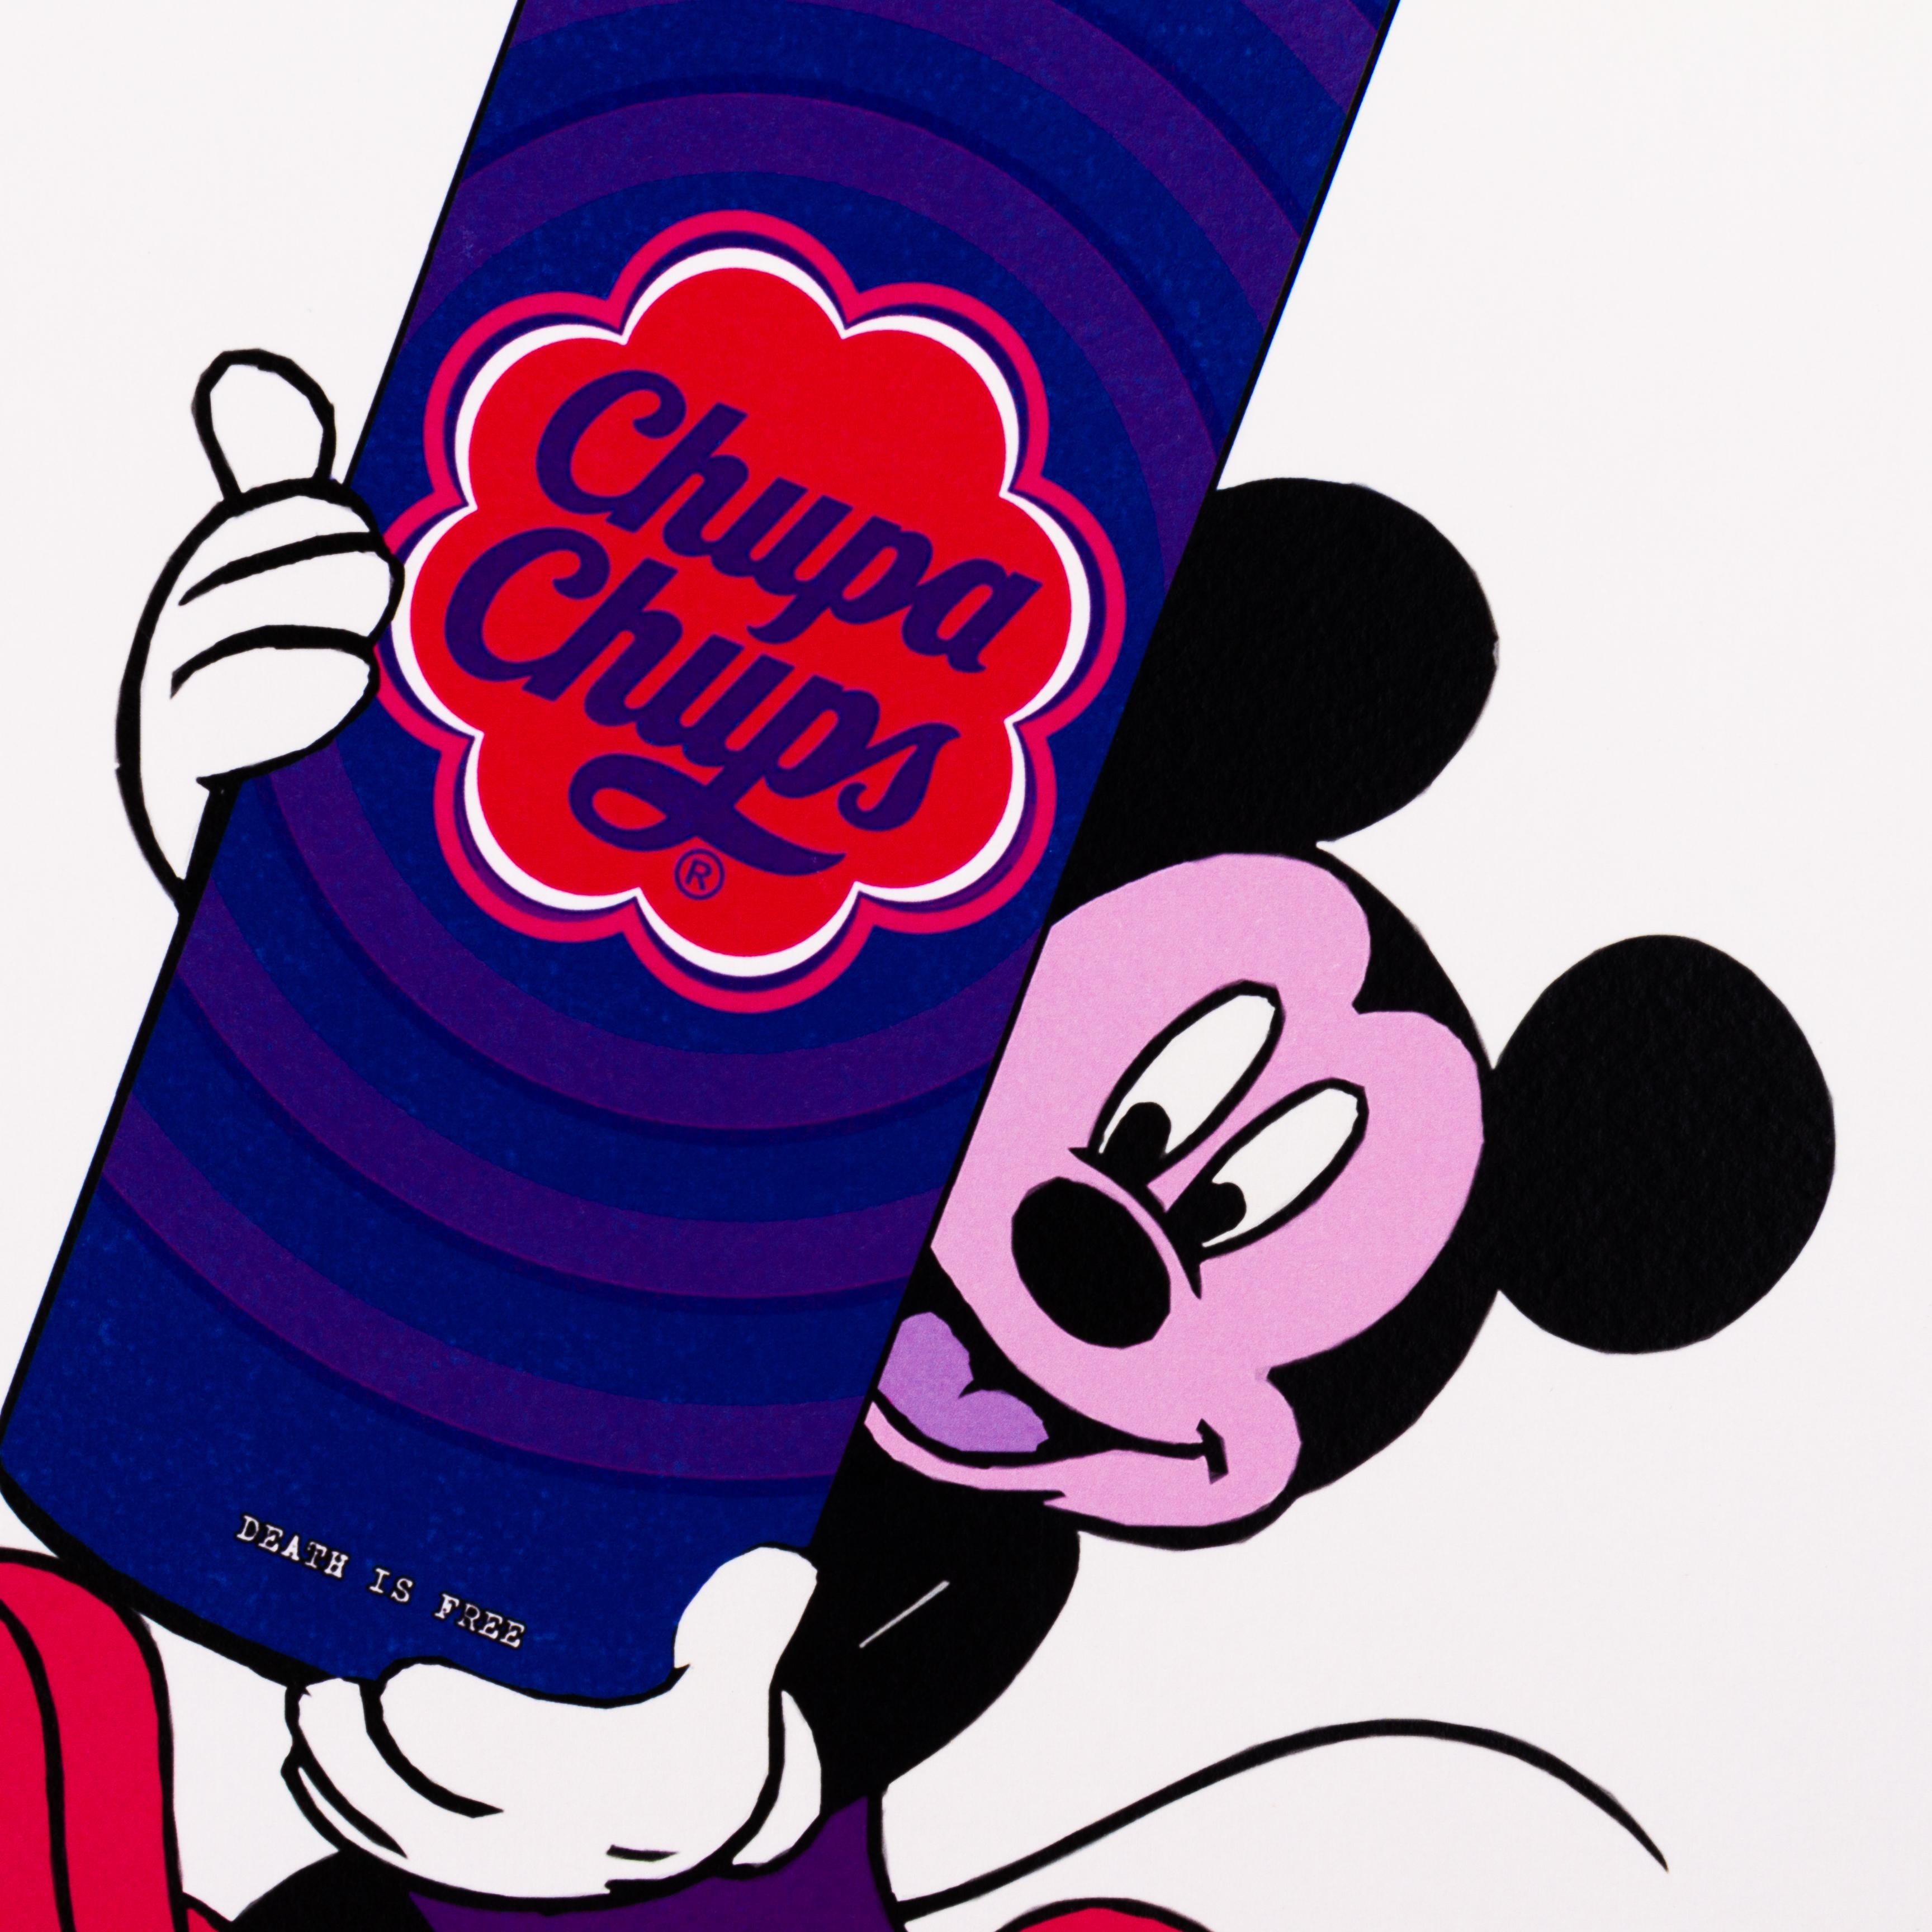 Death NYC Signed Limited Ed Pop Art Print Mickey Chupa Chups
From a private English collection
Free international shipping

